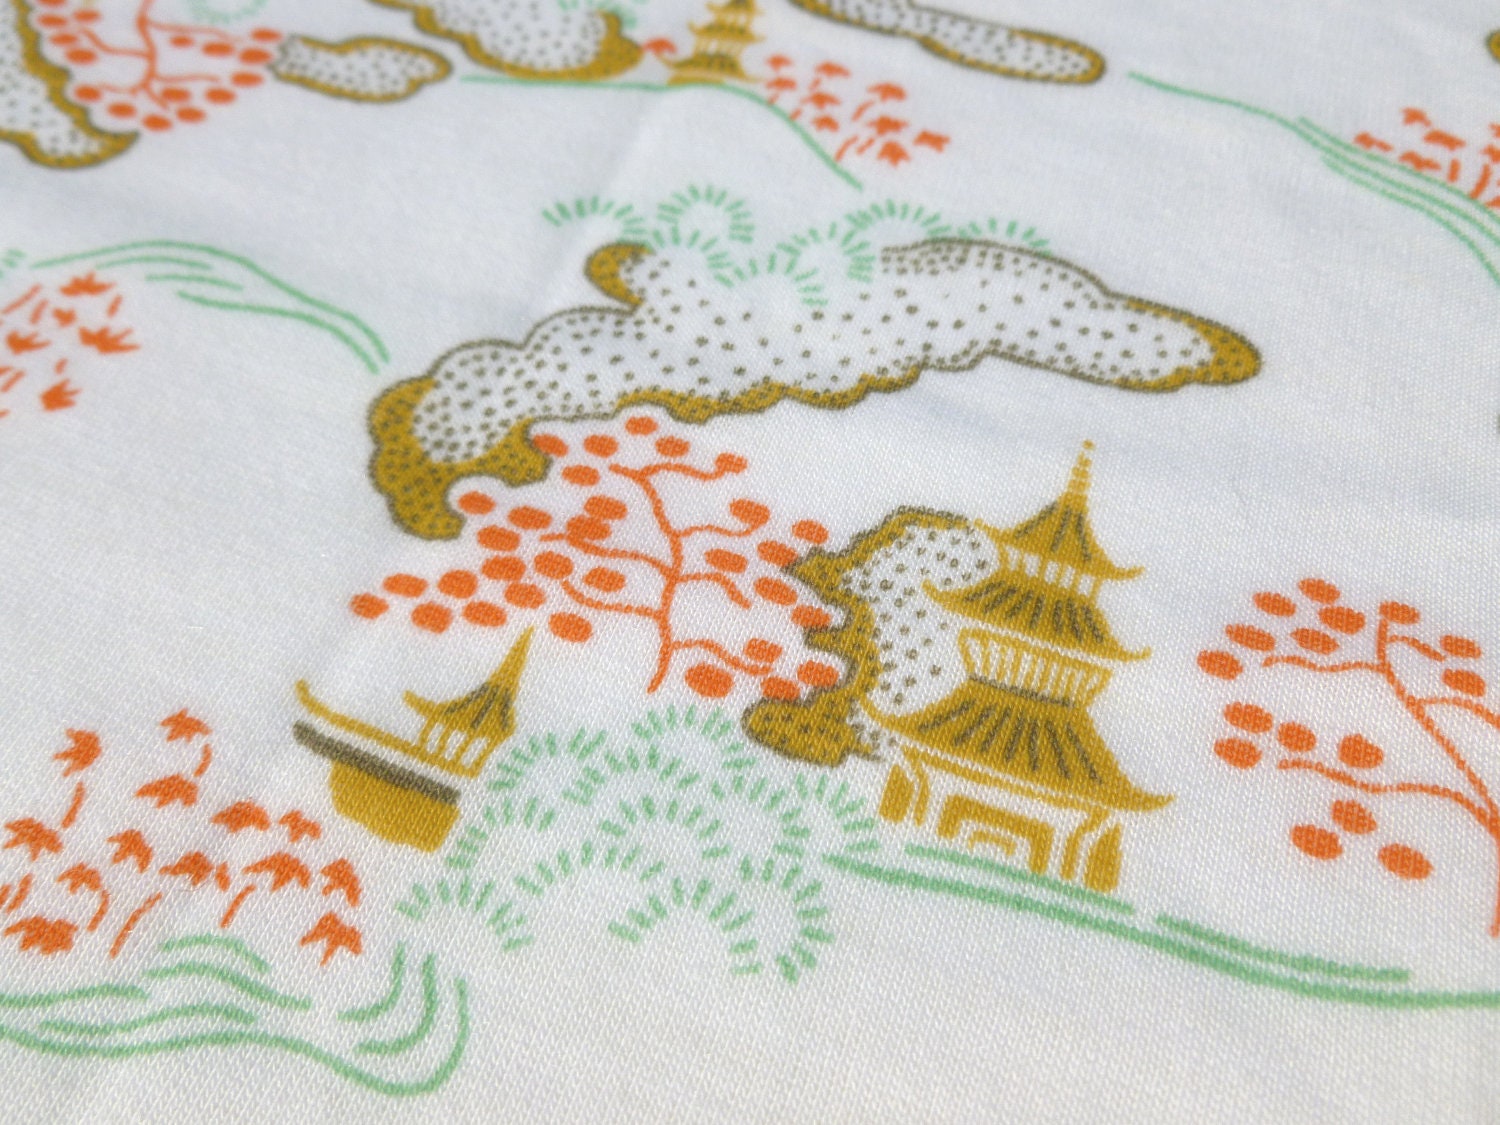 Chinoiserie Fabric with Asian Landscape, Pagodas, Trees and Clouds Stretch Cotton Polyester Blend Knit 1 Yard Destash by Klopman Mills